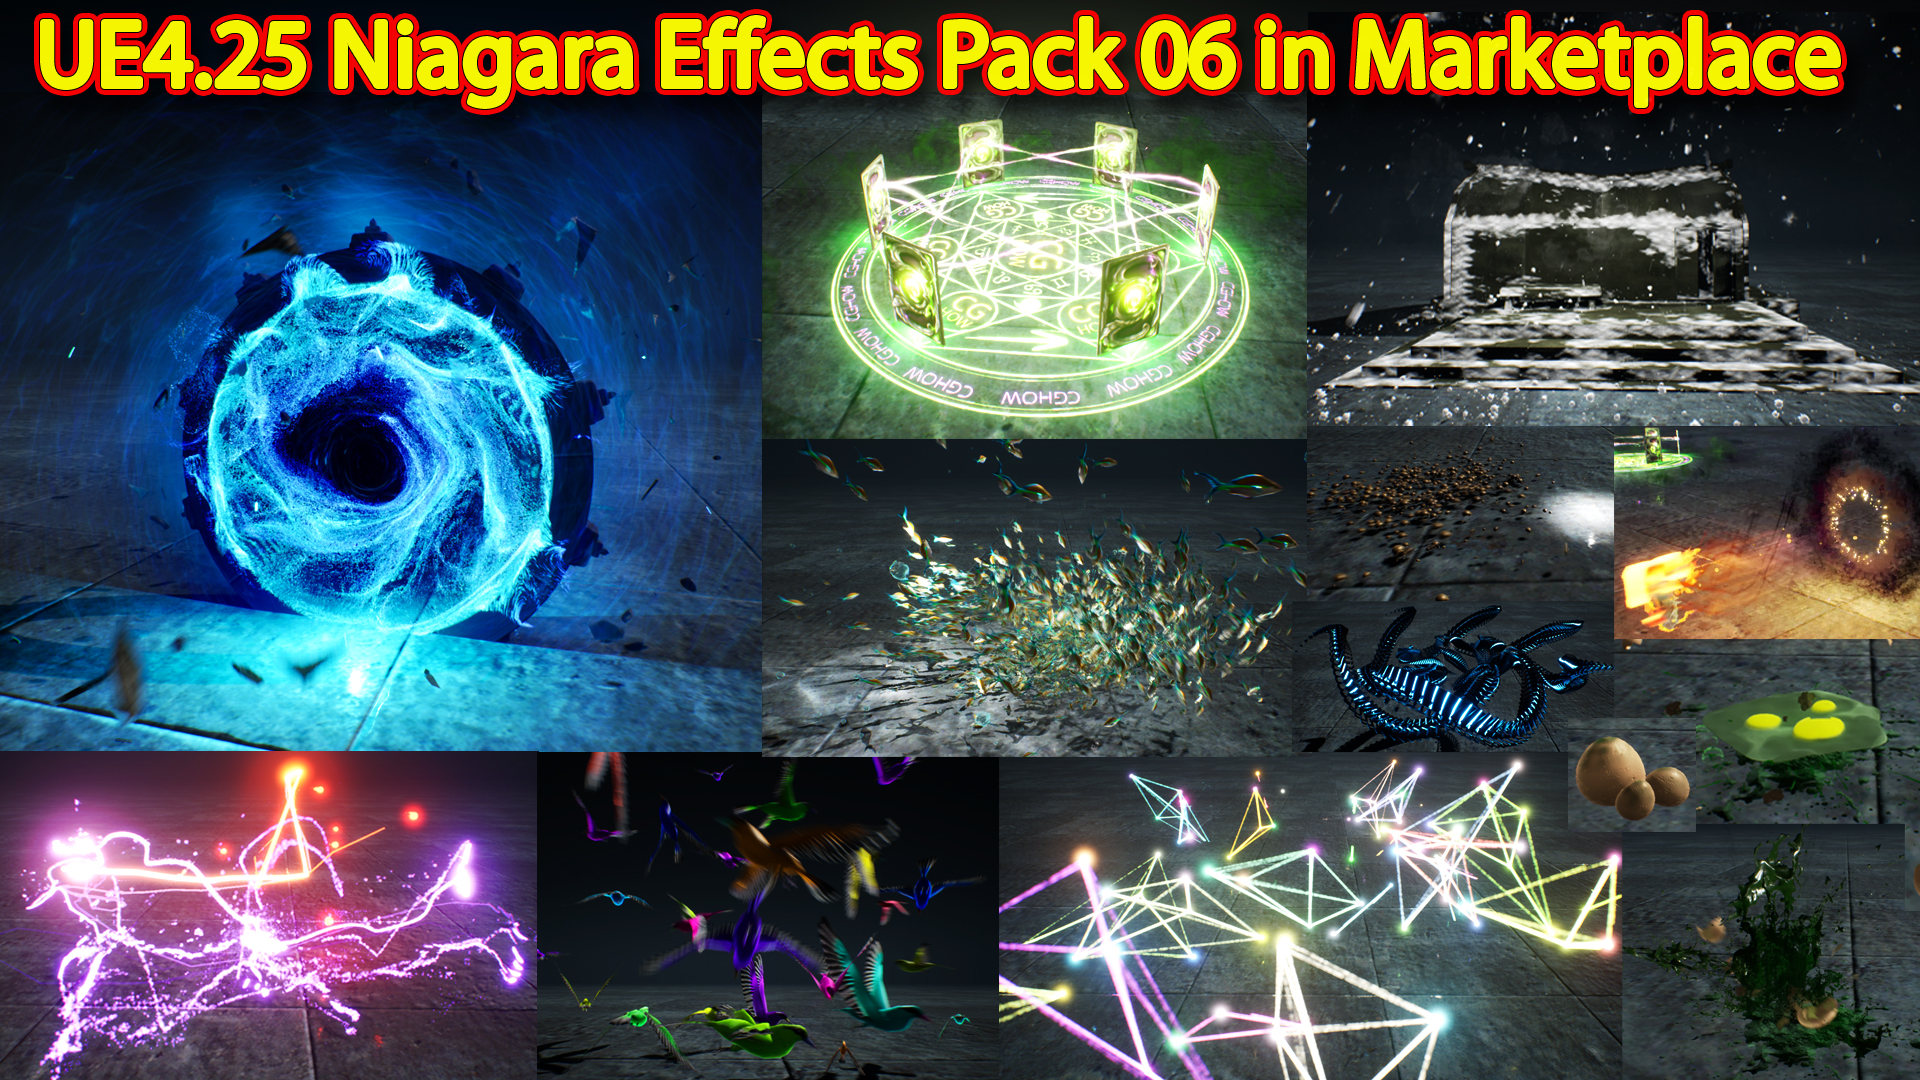 UE4.25 Niagara Effects Pack 06 in Martketplace